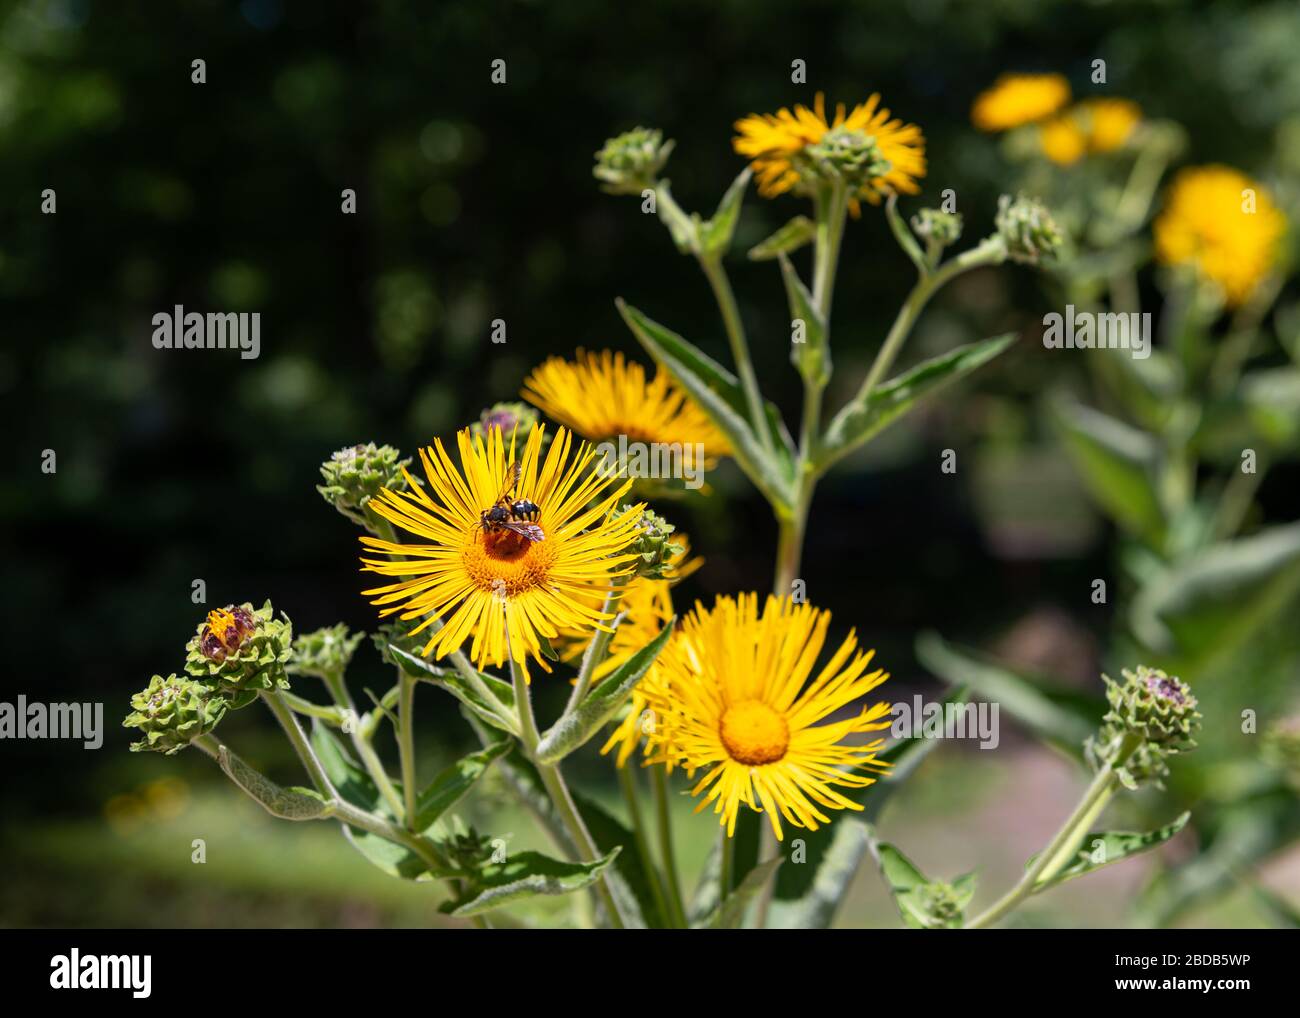 Yellow coloured flowers being pollinated by a wasp or bee Stock Photo